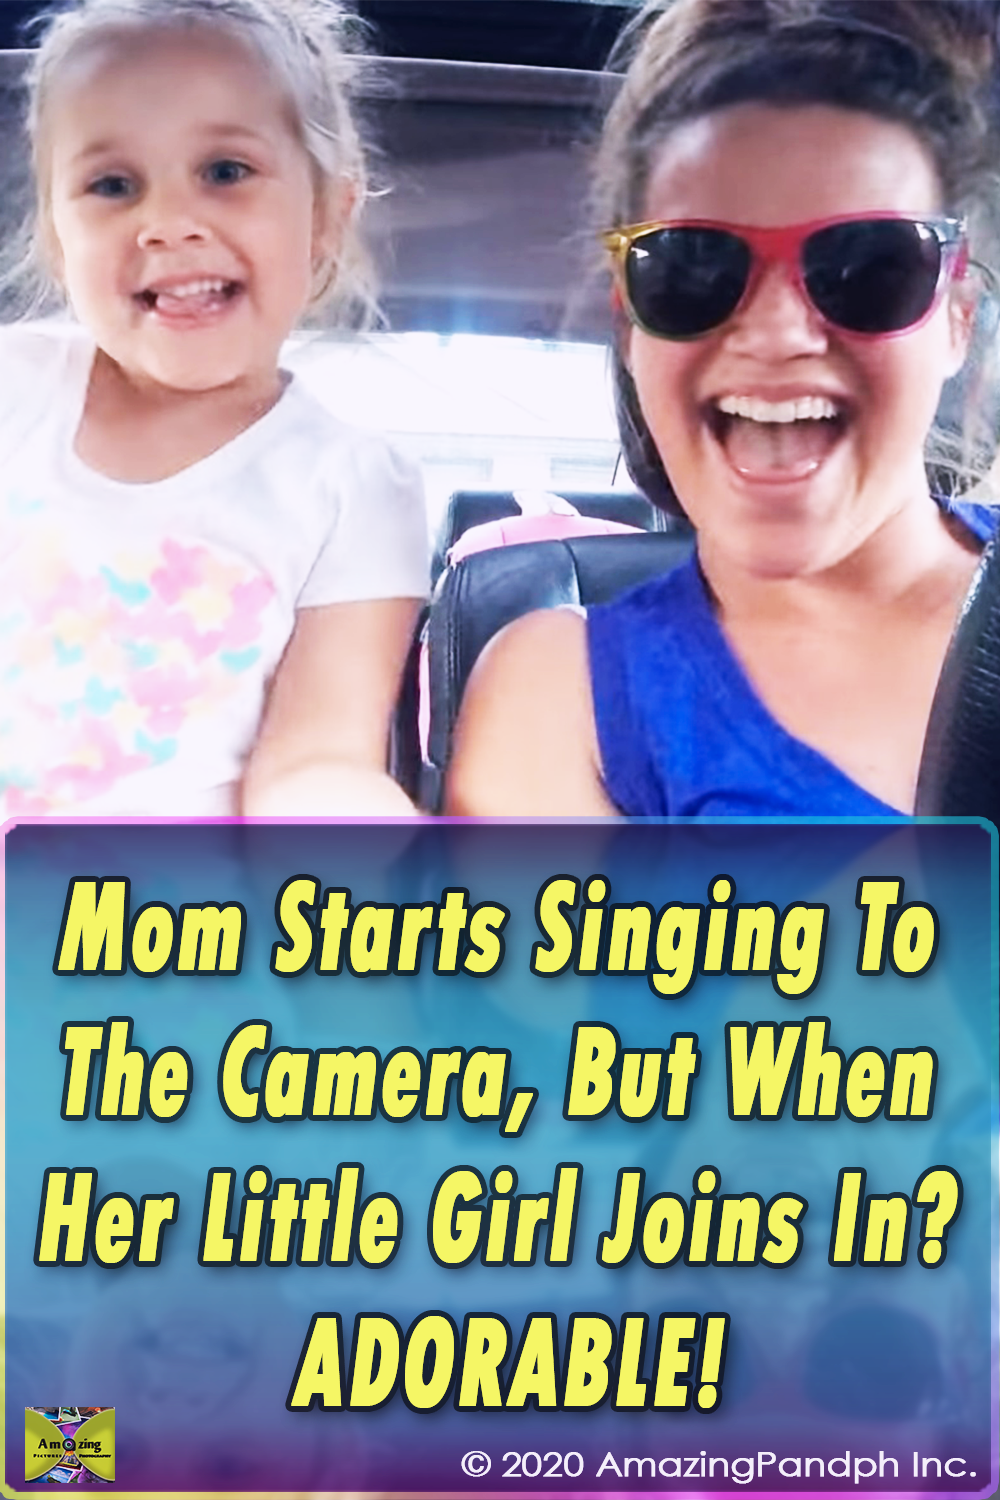 Mom ,Starts Singing ,To The Camera,Camera,Sing,Start,Mom,video,adorable,daughter